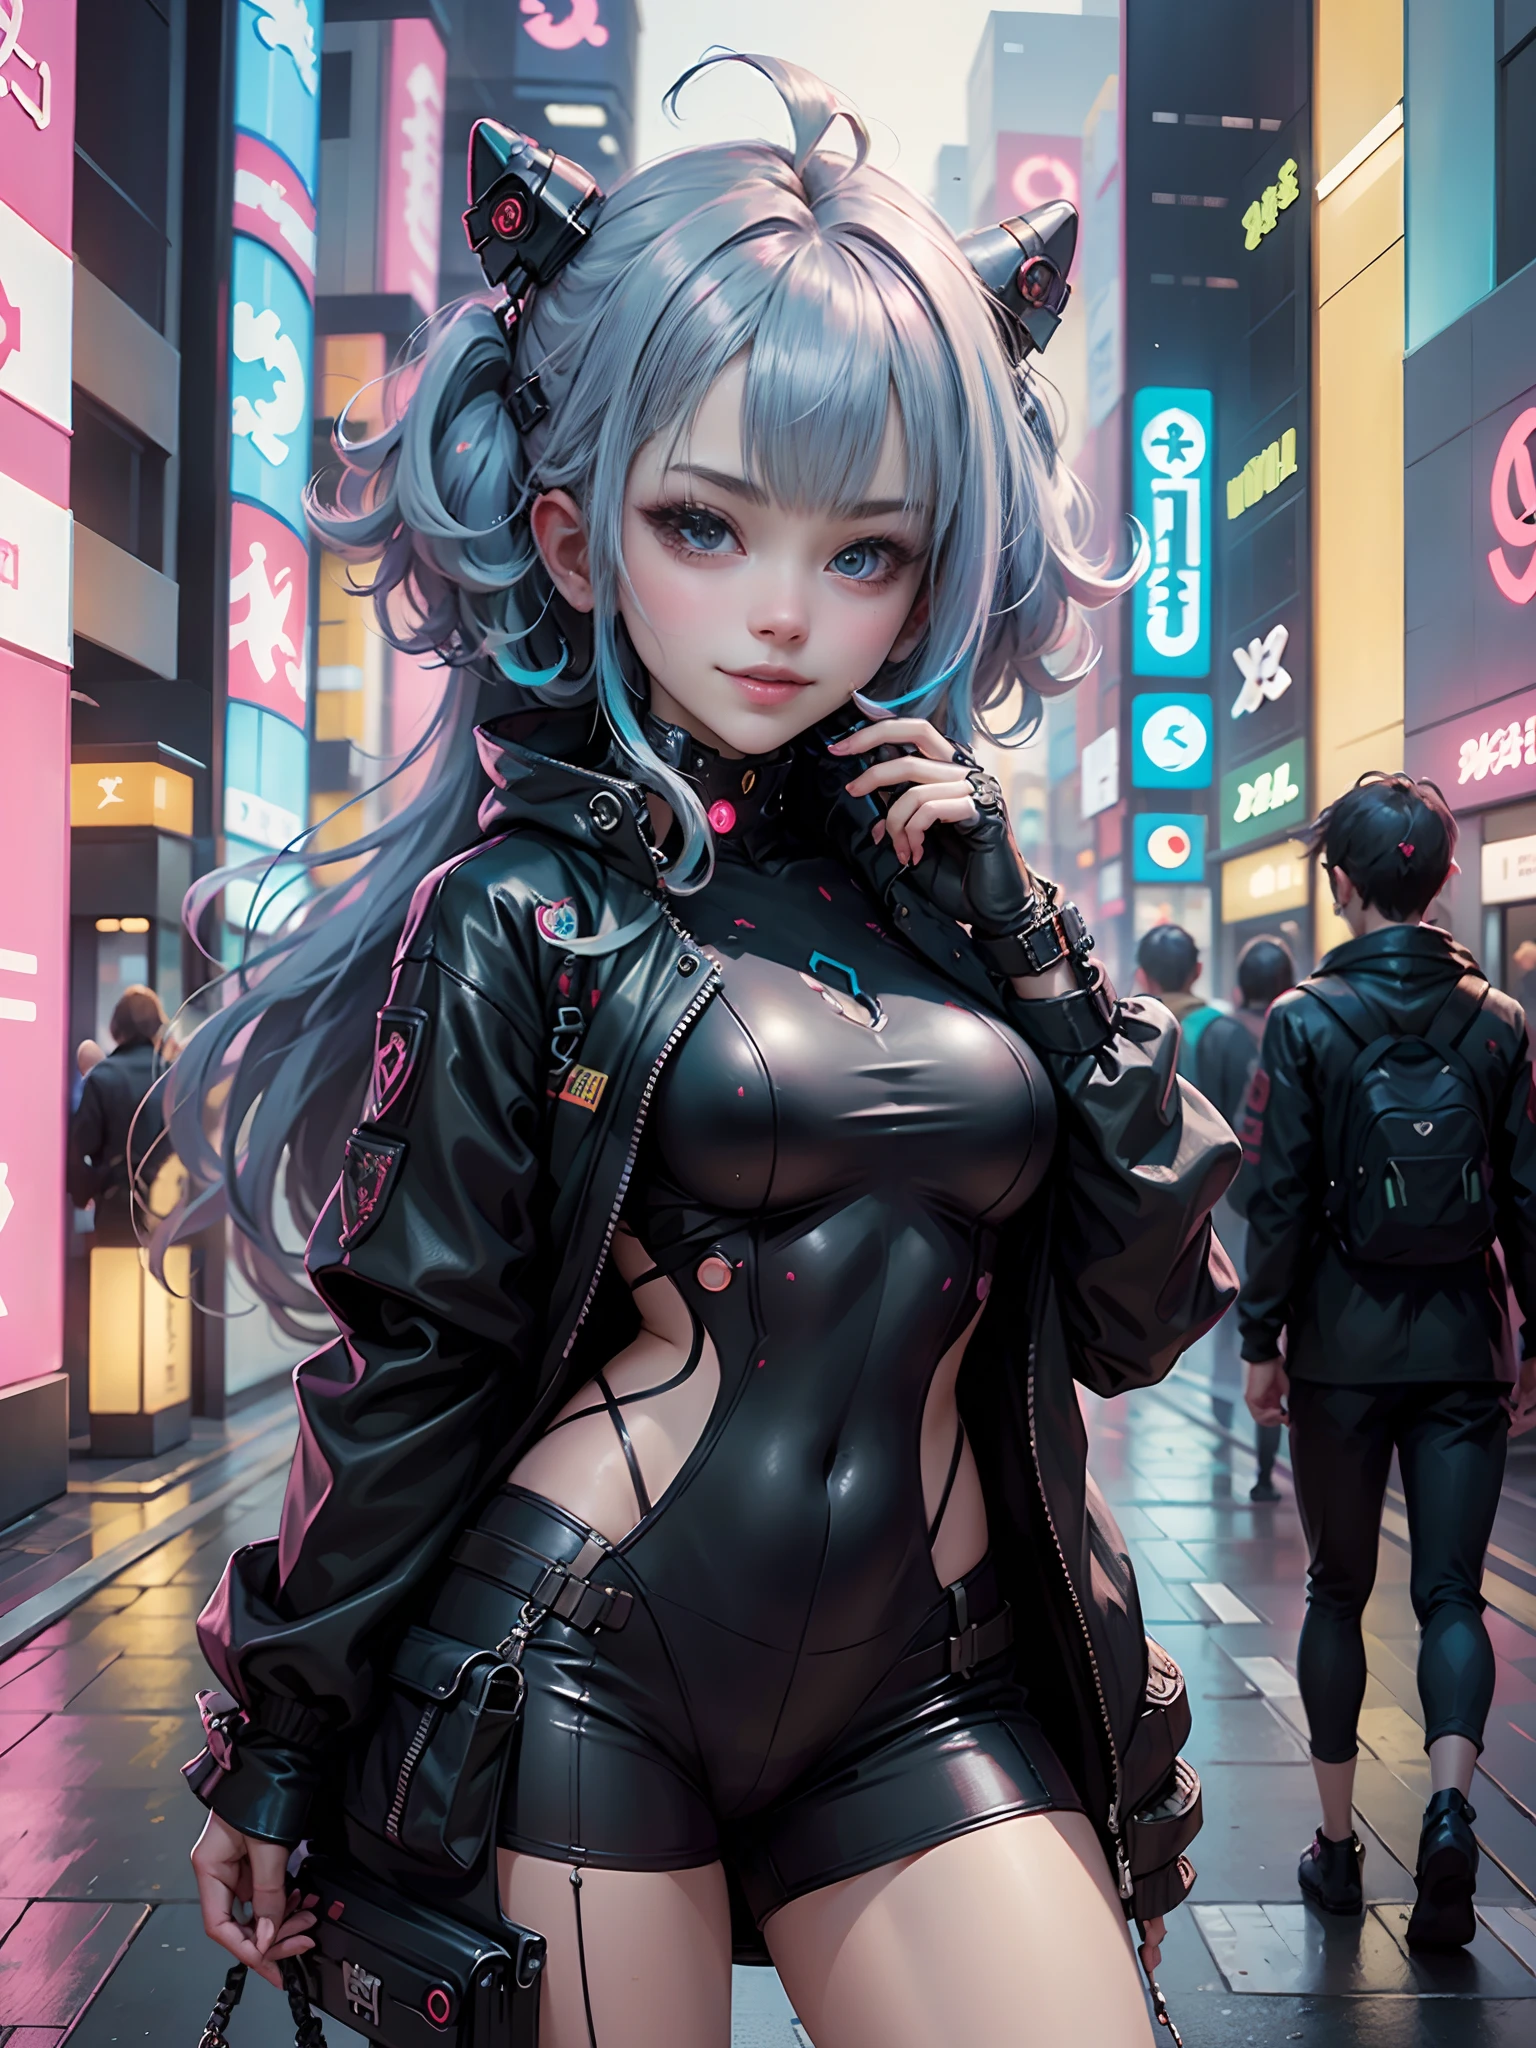 masterpiece, best quality, 2 smiling teenaged cyberpunk girls standing together taking selfie portrait, ((((Harajuku-inspired cyberpunk clothing)))), bold colors and patterns, eye-catching accessories, trendy and innovative hairstyle))), ((insane detail)), dazzling Cyberpunk cityscape, skyscrapers, glowing neon signs, (LED lights), anime illustration, detailed skin texture, detailed cloth texture, beautiful detailed face, intricate details, ultra detailed, cinematic lighting, strong contrast.